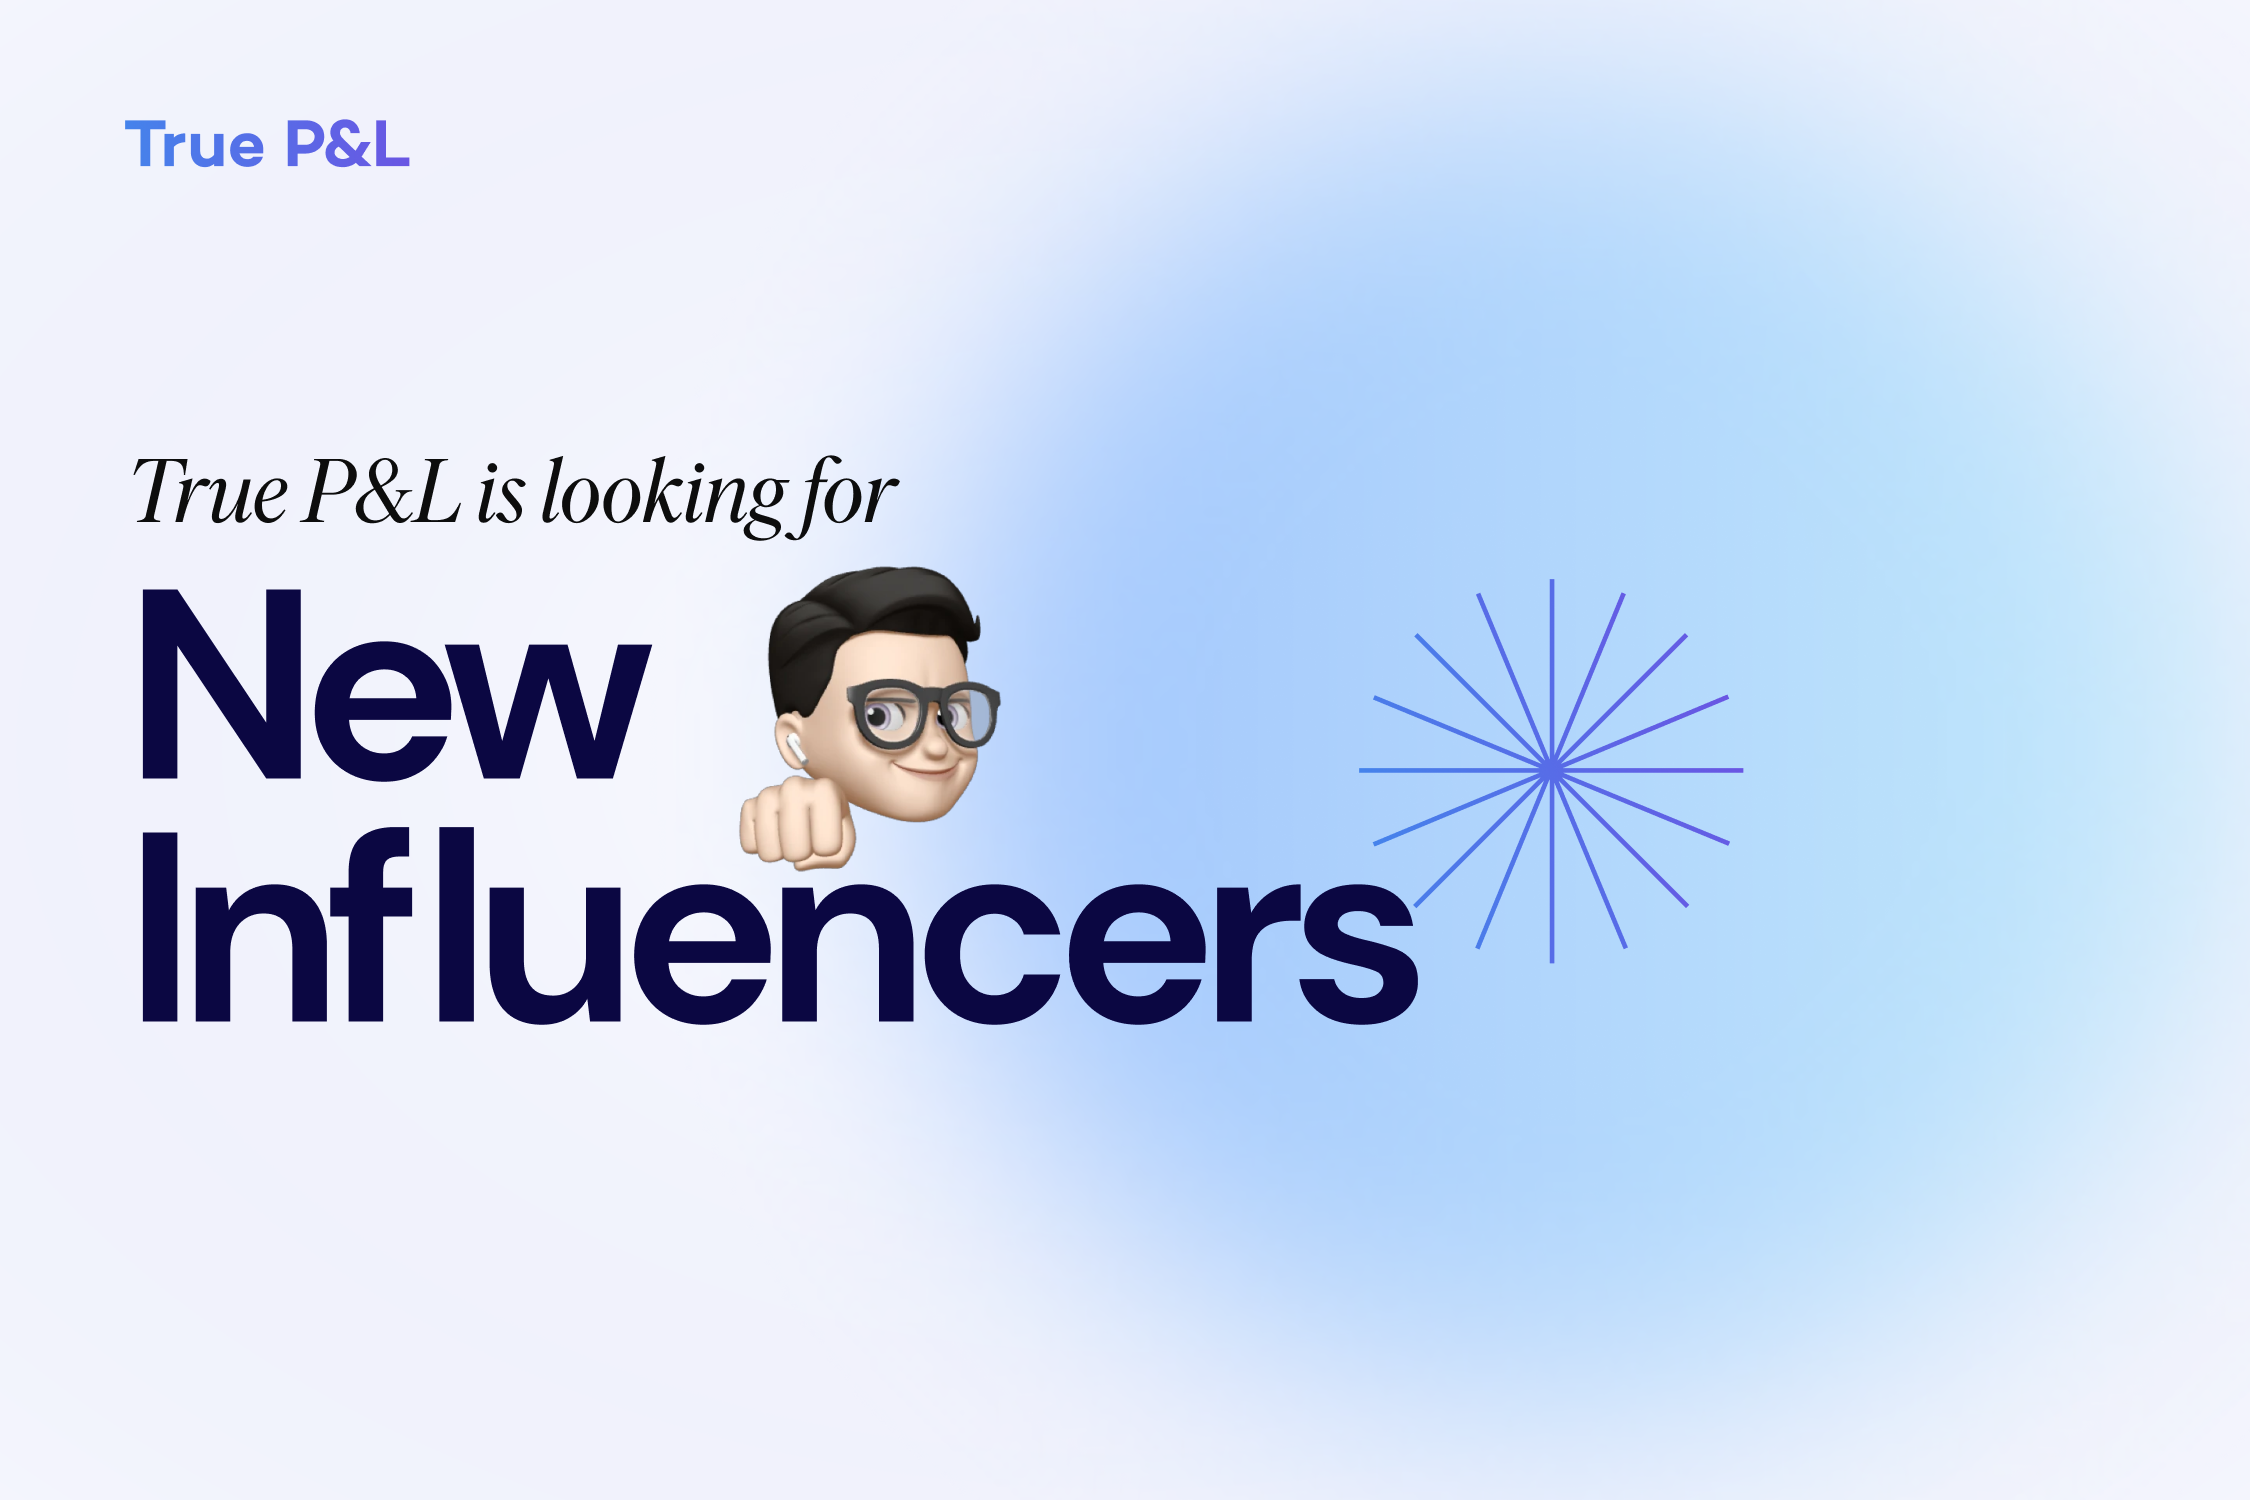 <div>True P&L is looking for new influencers</div>